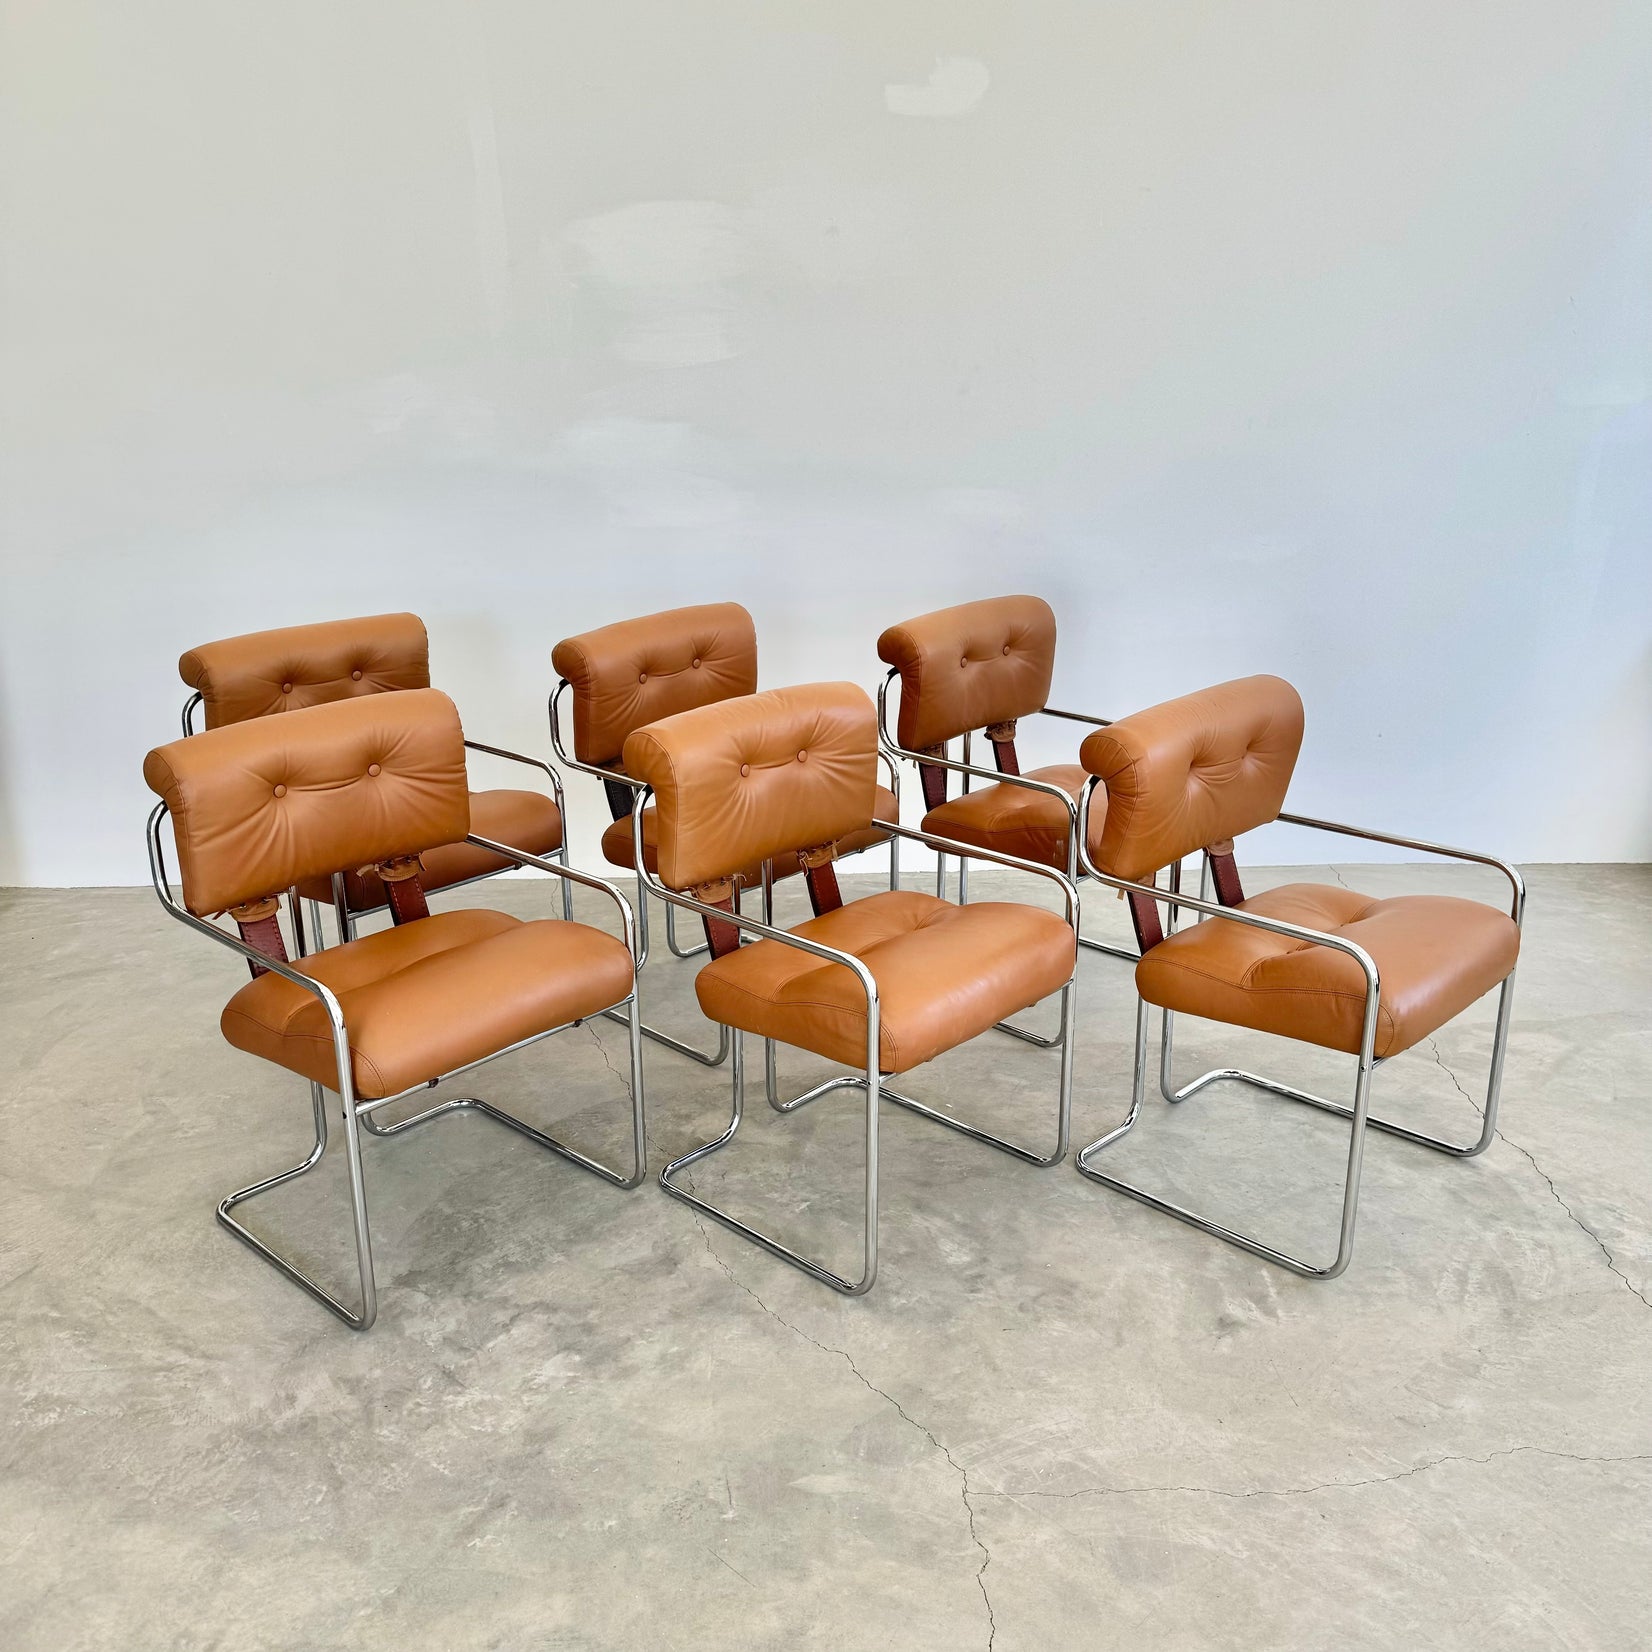 Set of 6 'Tucroma' Chairs in Tan Leather by Guido Faleschini, 1970s Italy